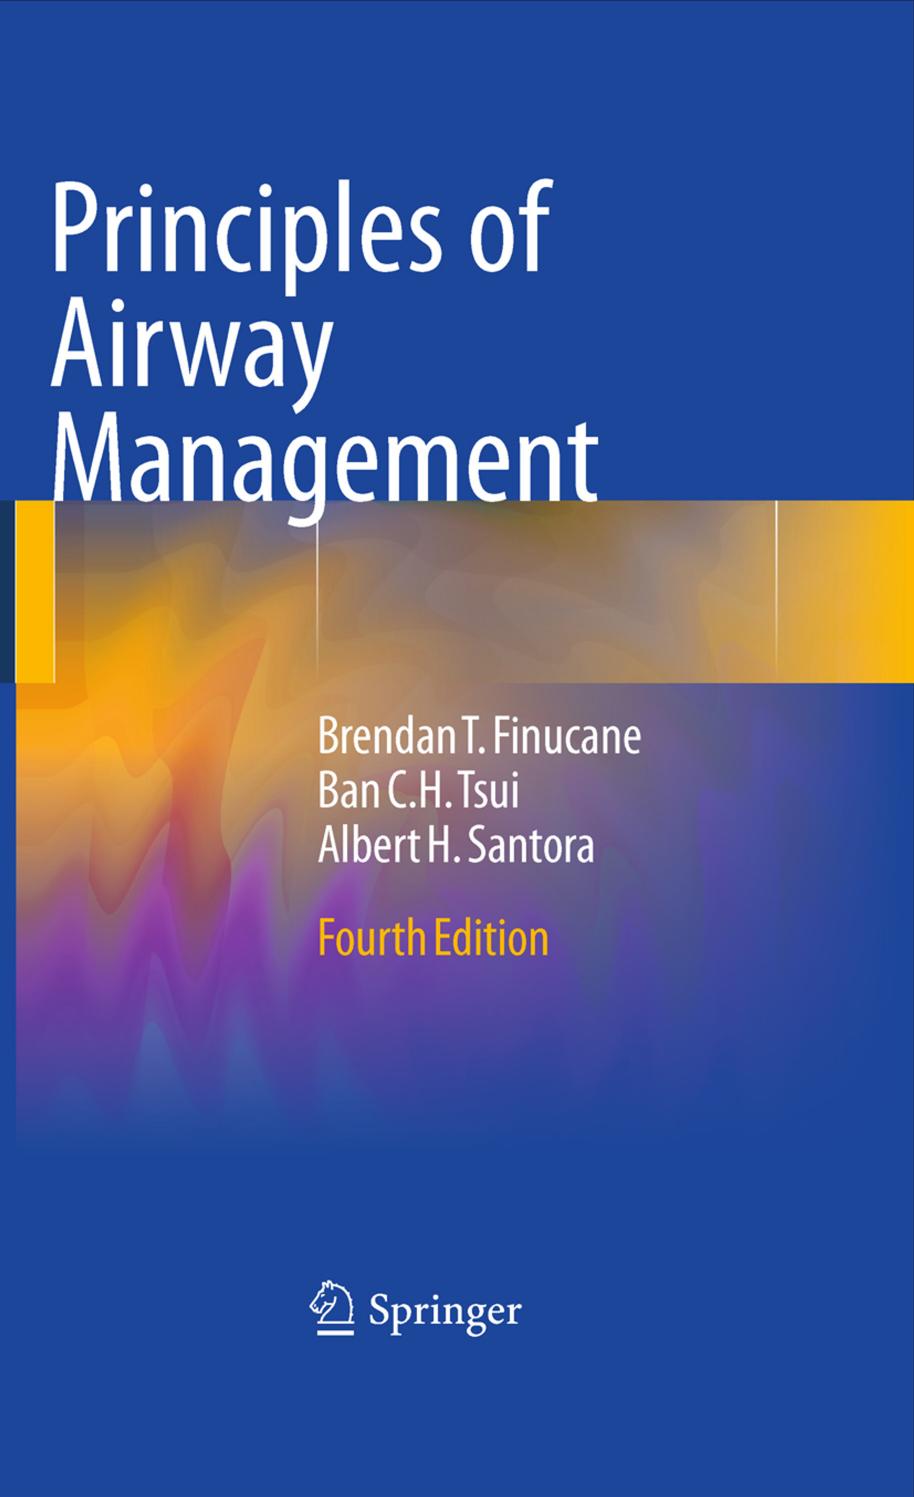 Principles of Airway Management, Fourth Edition